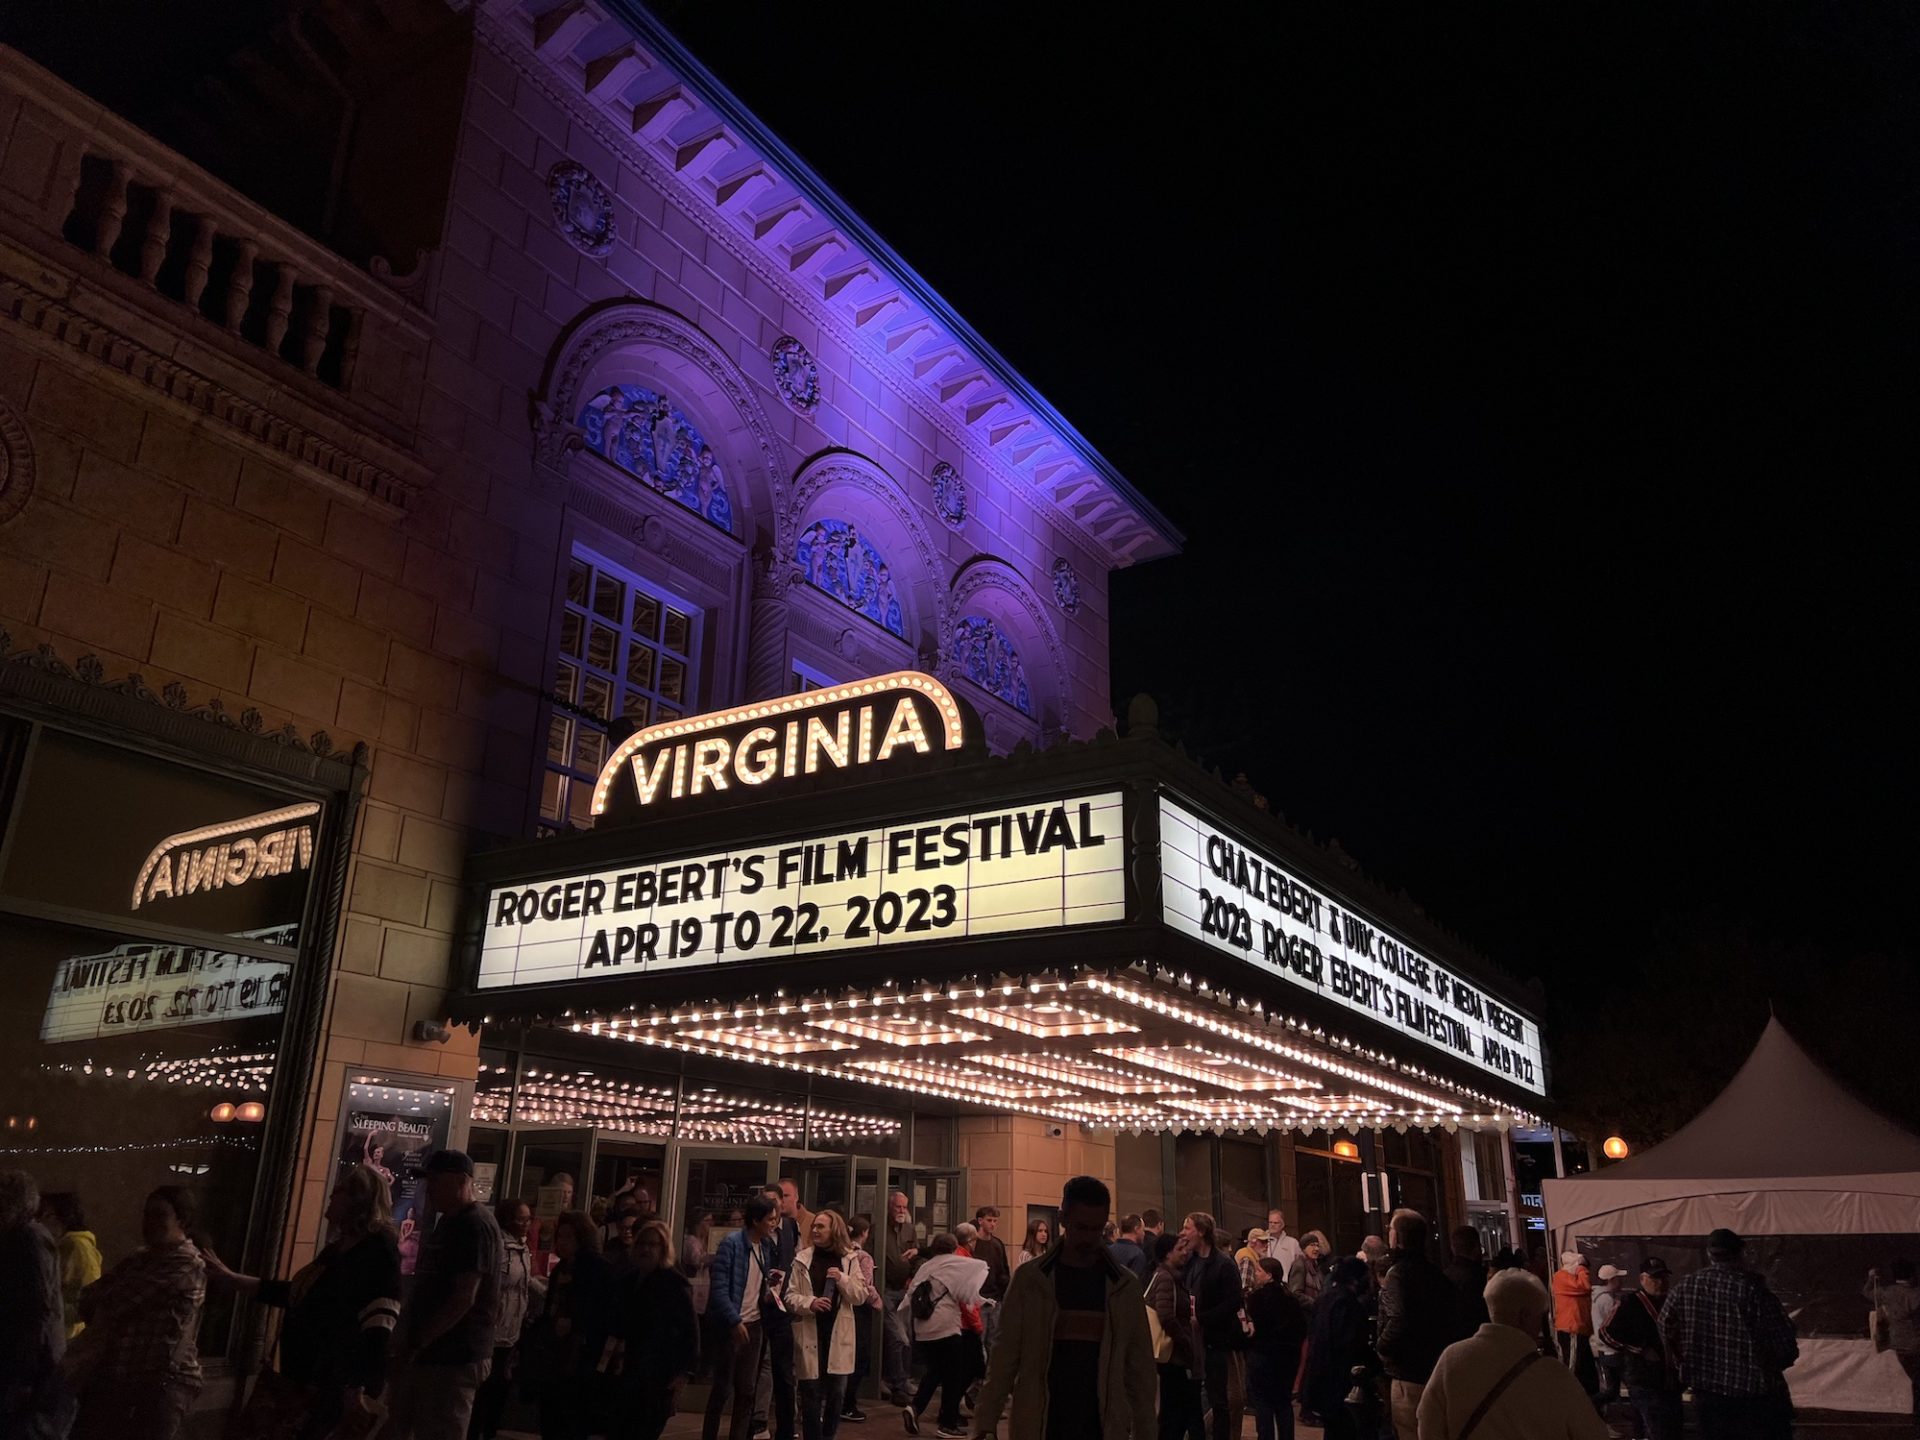 An outside nighttime shot of the marquee at the Virginia Theatre reads Roger Ebert's Film Festival April 19 to 22 2023